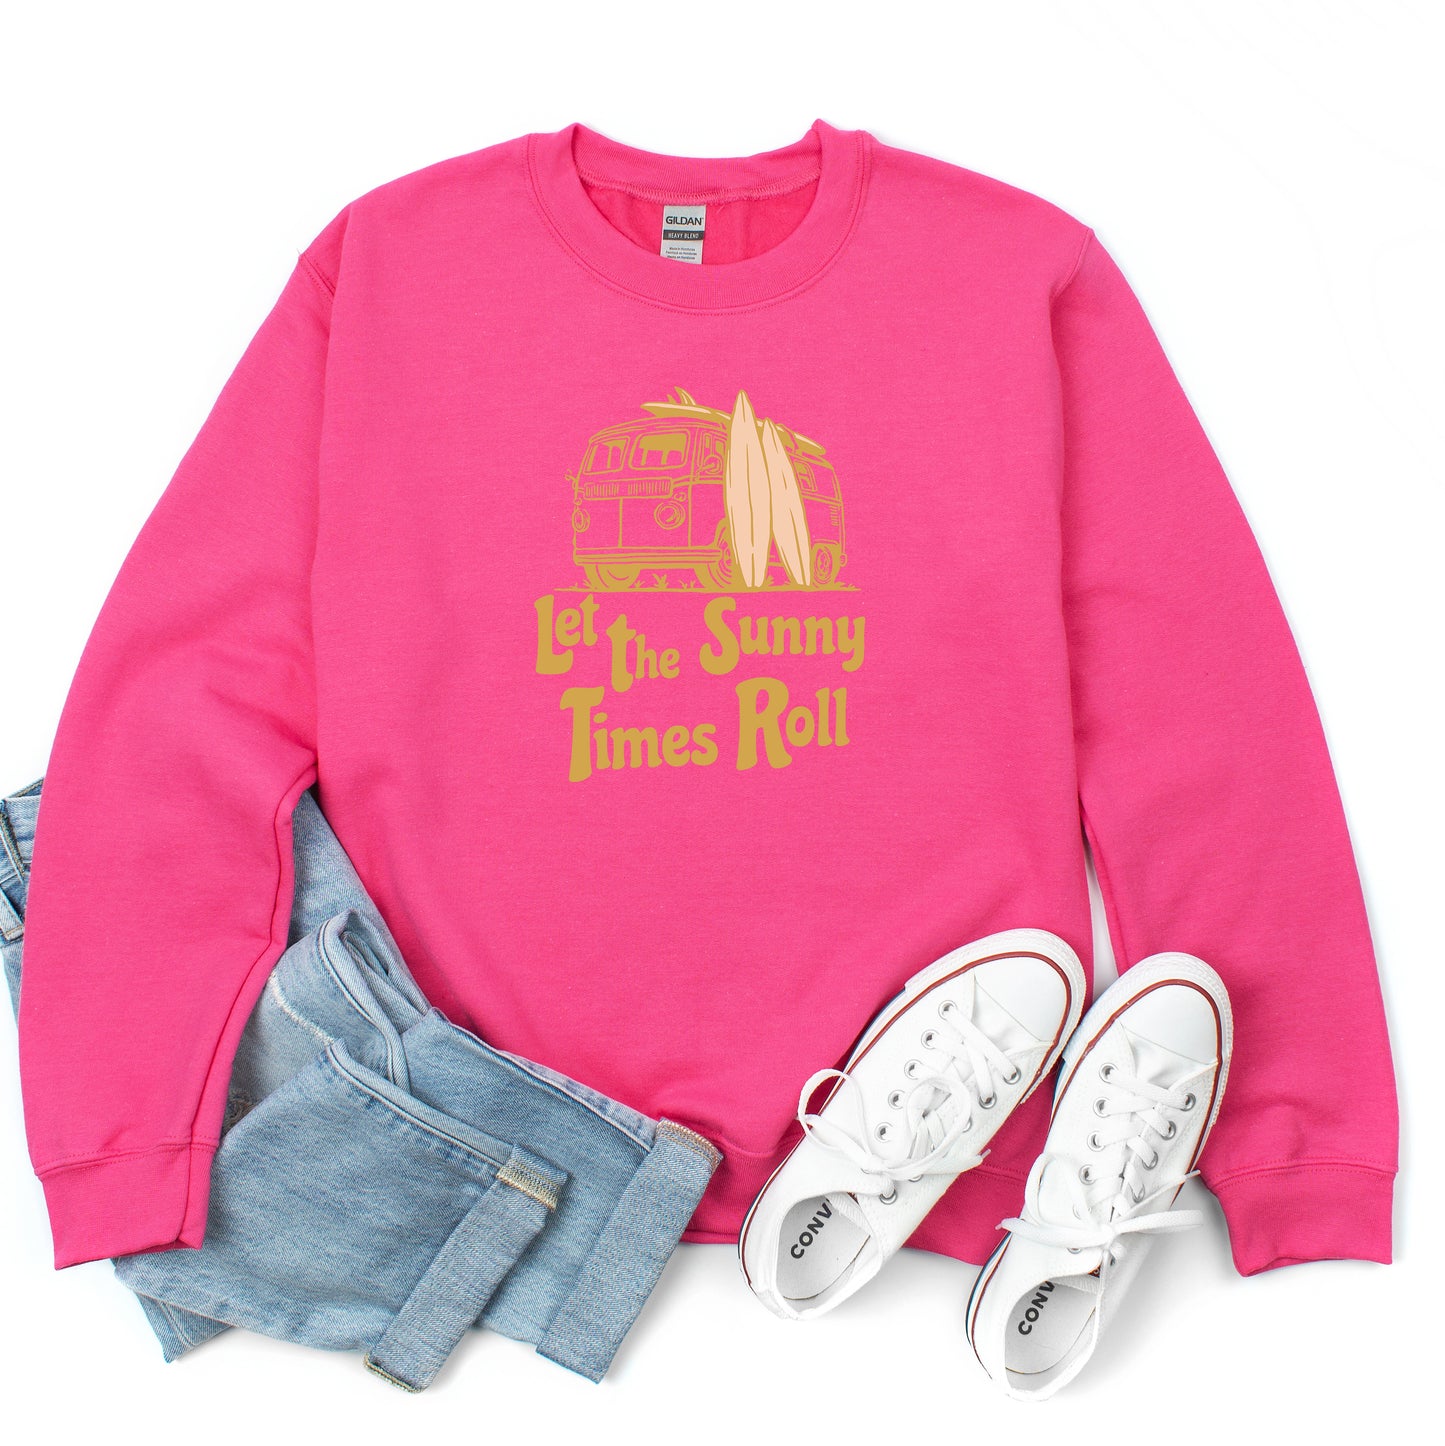 Let The Sunny Times Roll | Sweatshirt